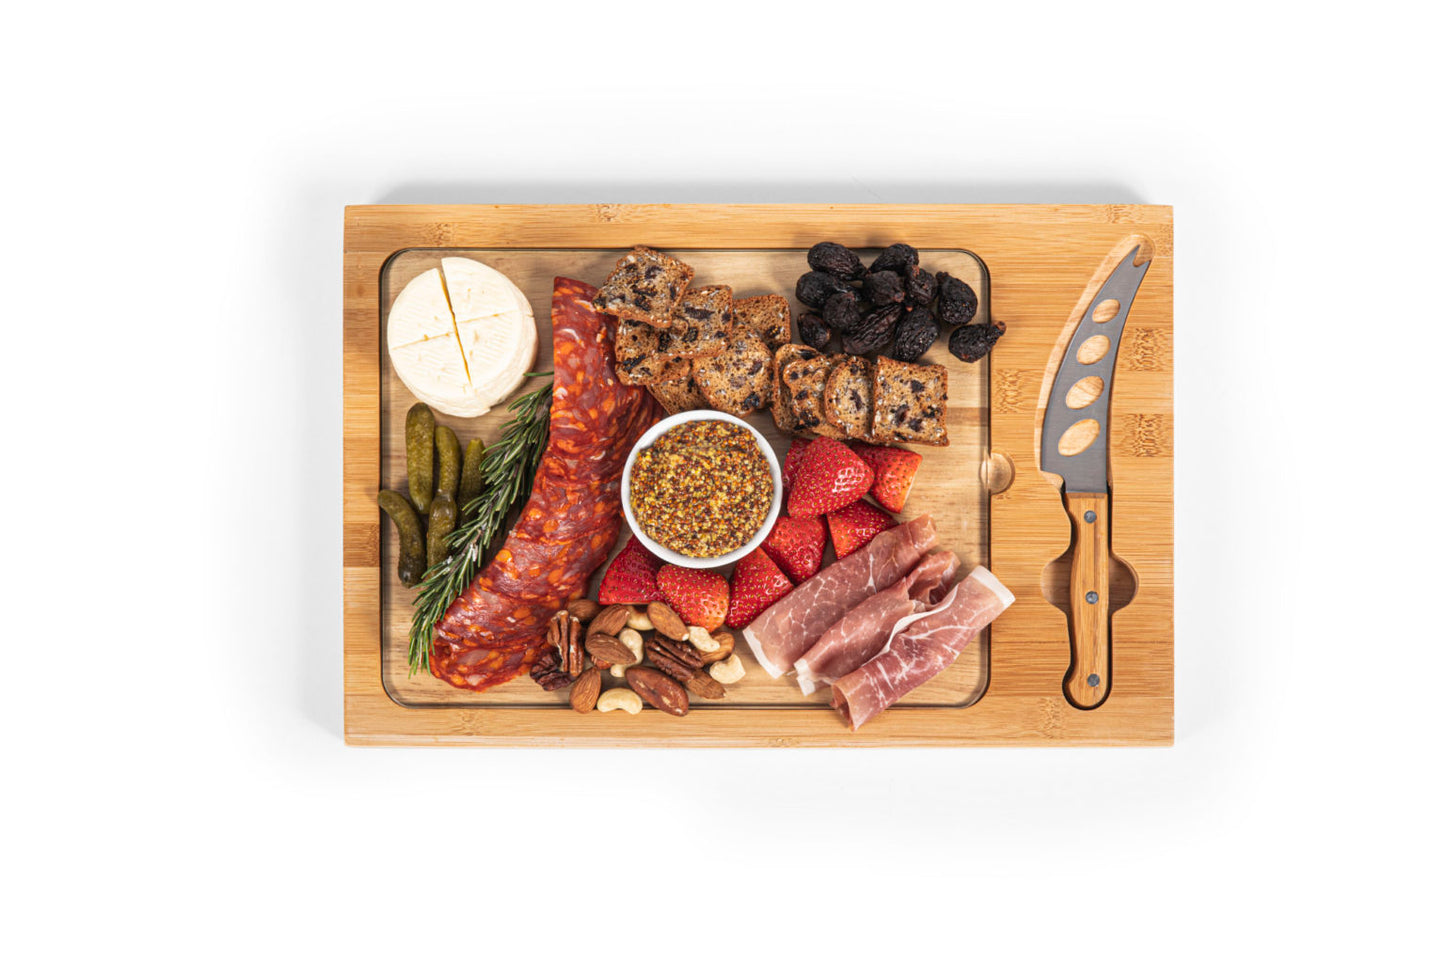 San Francisco 49ers - Icon Glass Top Cutting Board & Knife Set by Picnic Time